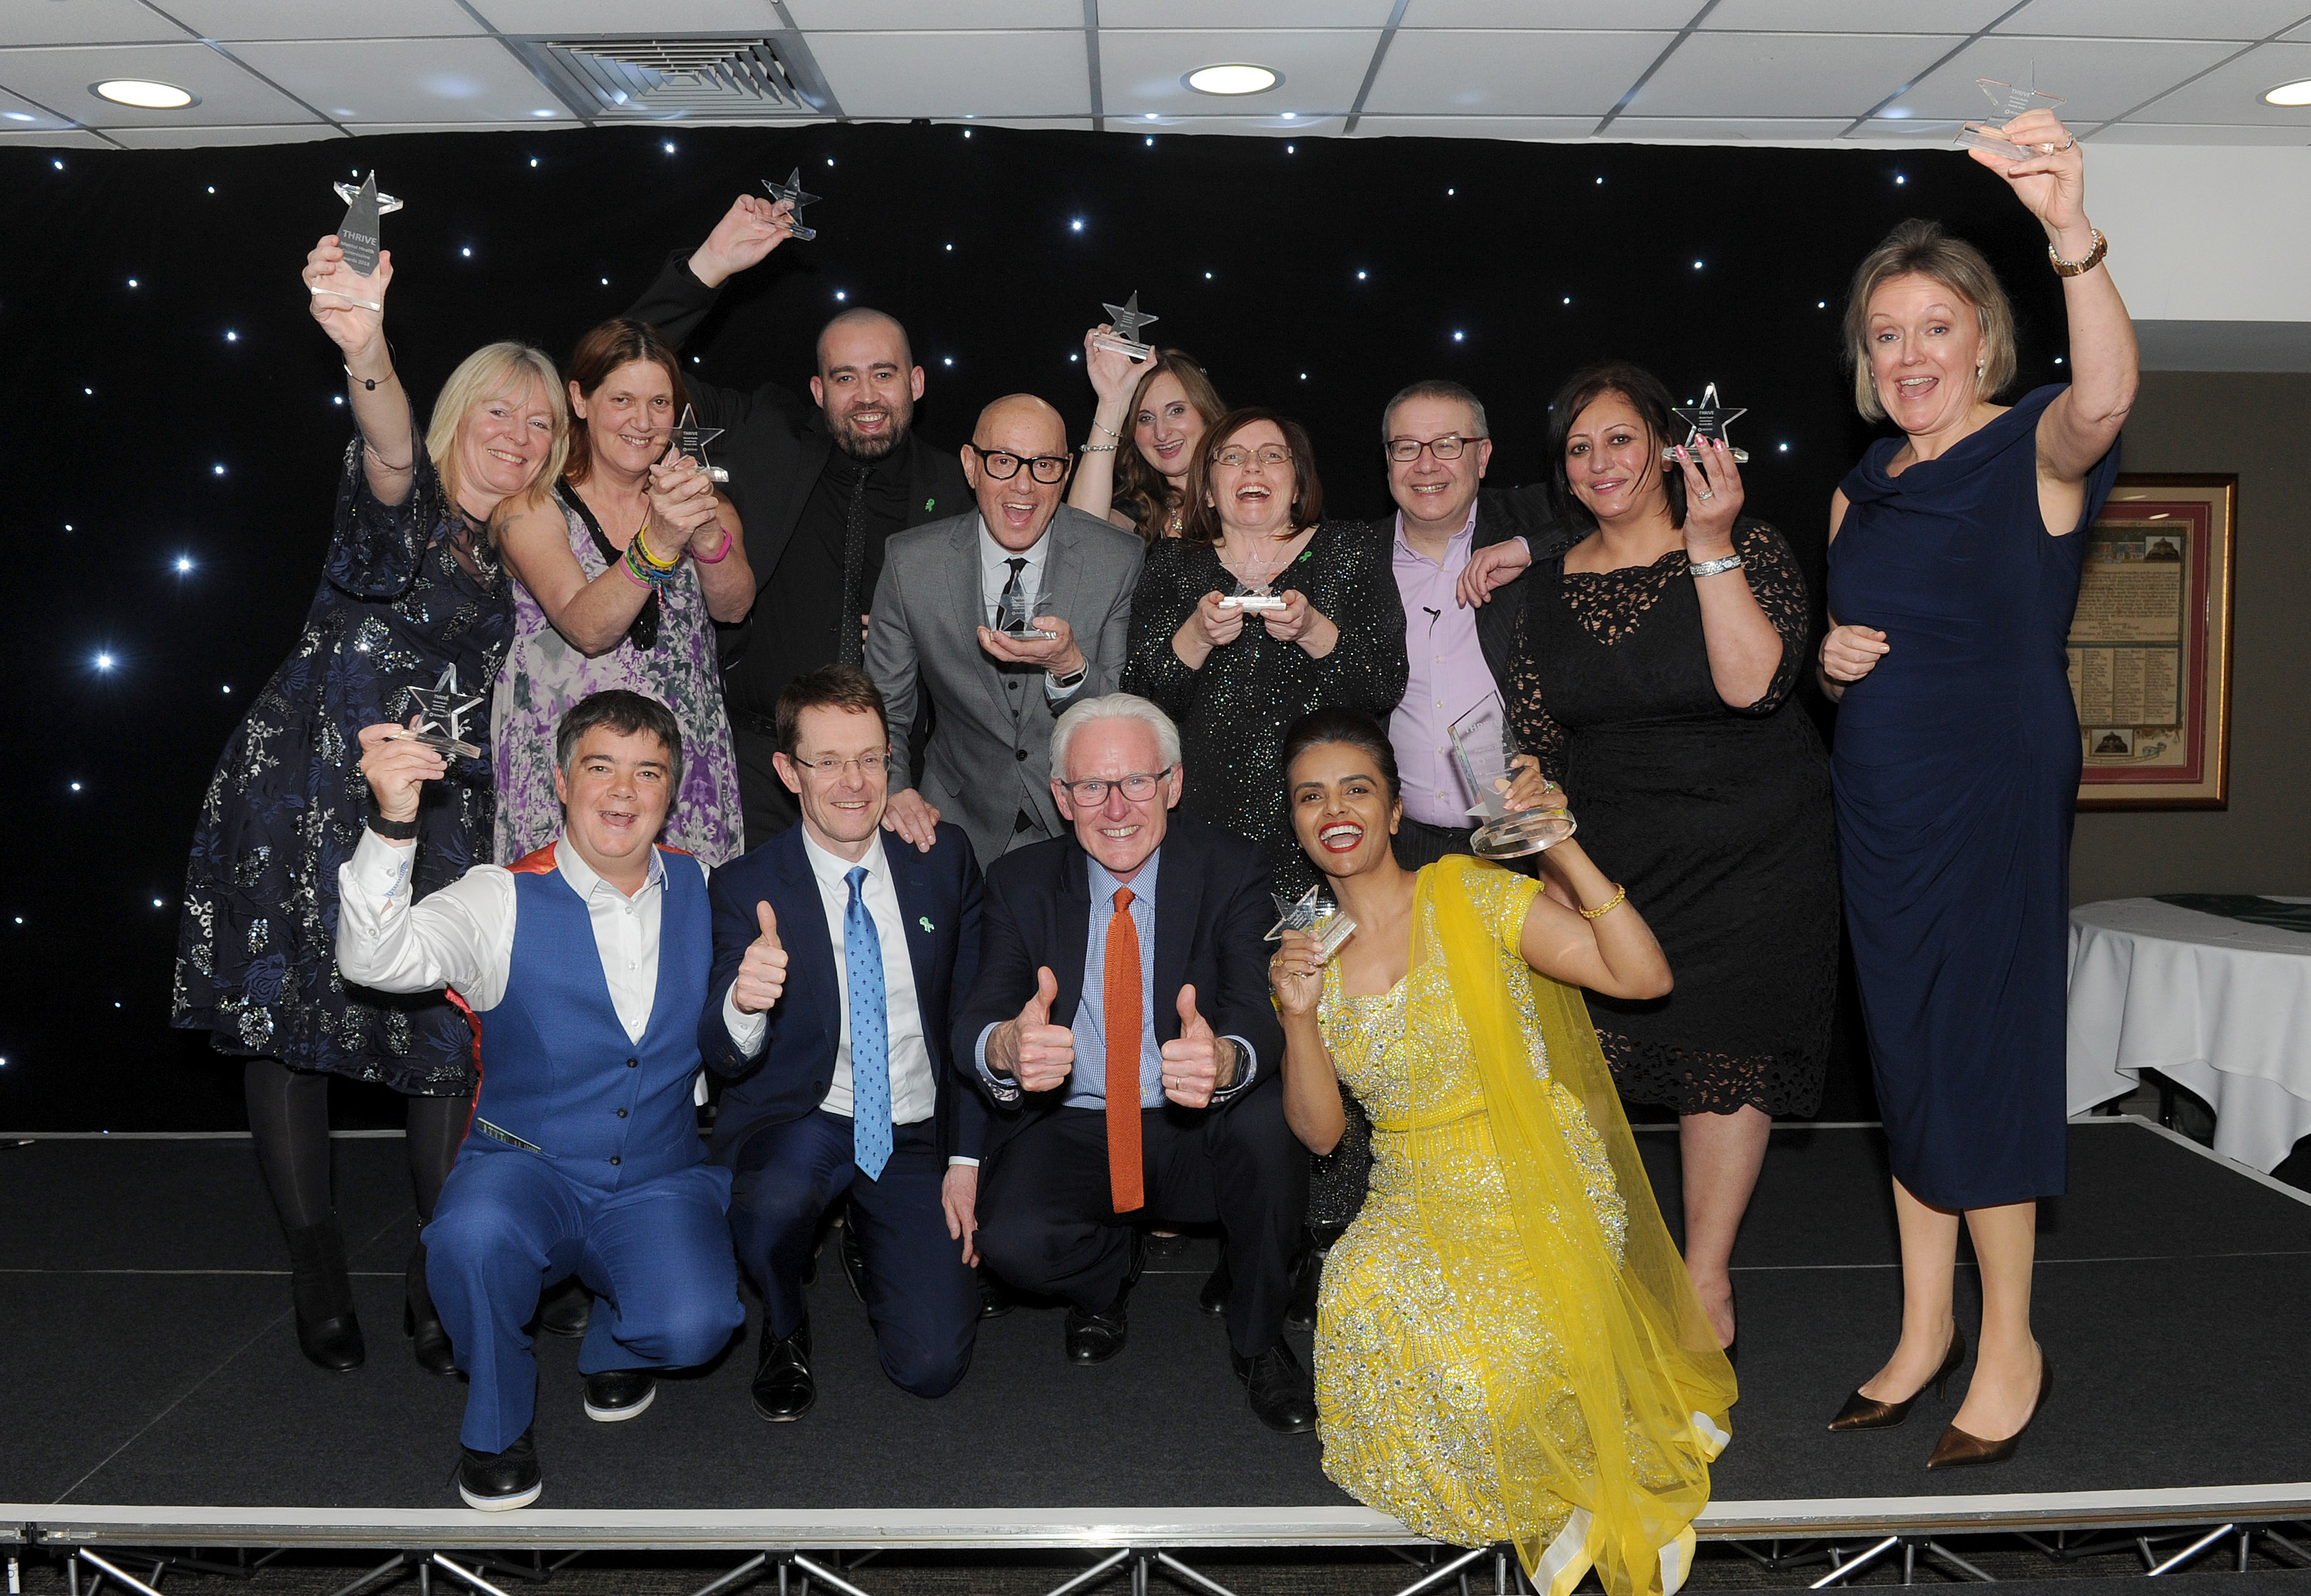 Regional Mental Health Superstar Gurbax Kaur with fellow winners and speakers, including Norman Lamb MP and Mayor of the West Midlands Andy Street at the Thrive Mental Health Commission Awards 2018